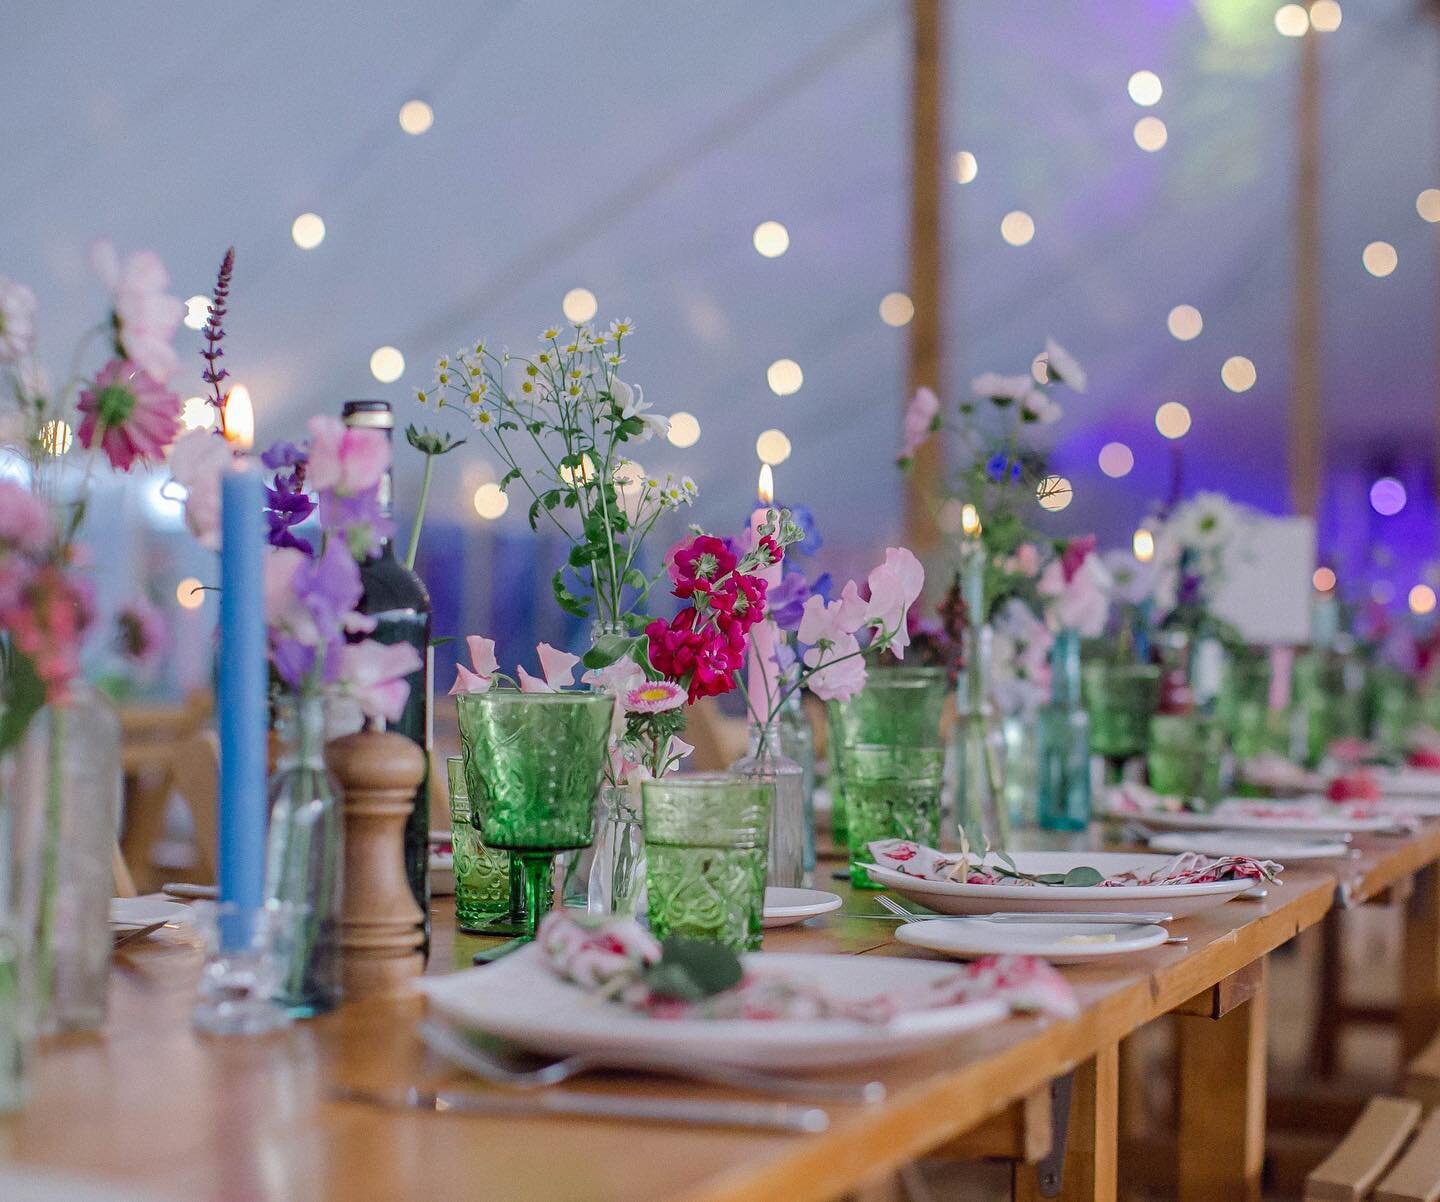 🌿Summer vibes🌿

Bright colours and wild flowers creating this whimsical summer tablescape. Wedding season is about to be in full swing and we cannot wait for an exciting summer ahead! 

🌸 @hannah.hunnam 
📸 @bizzyarnottphotography

#weddings #part